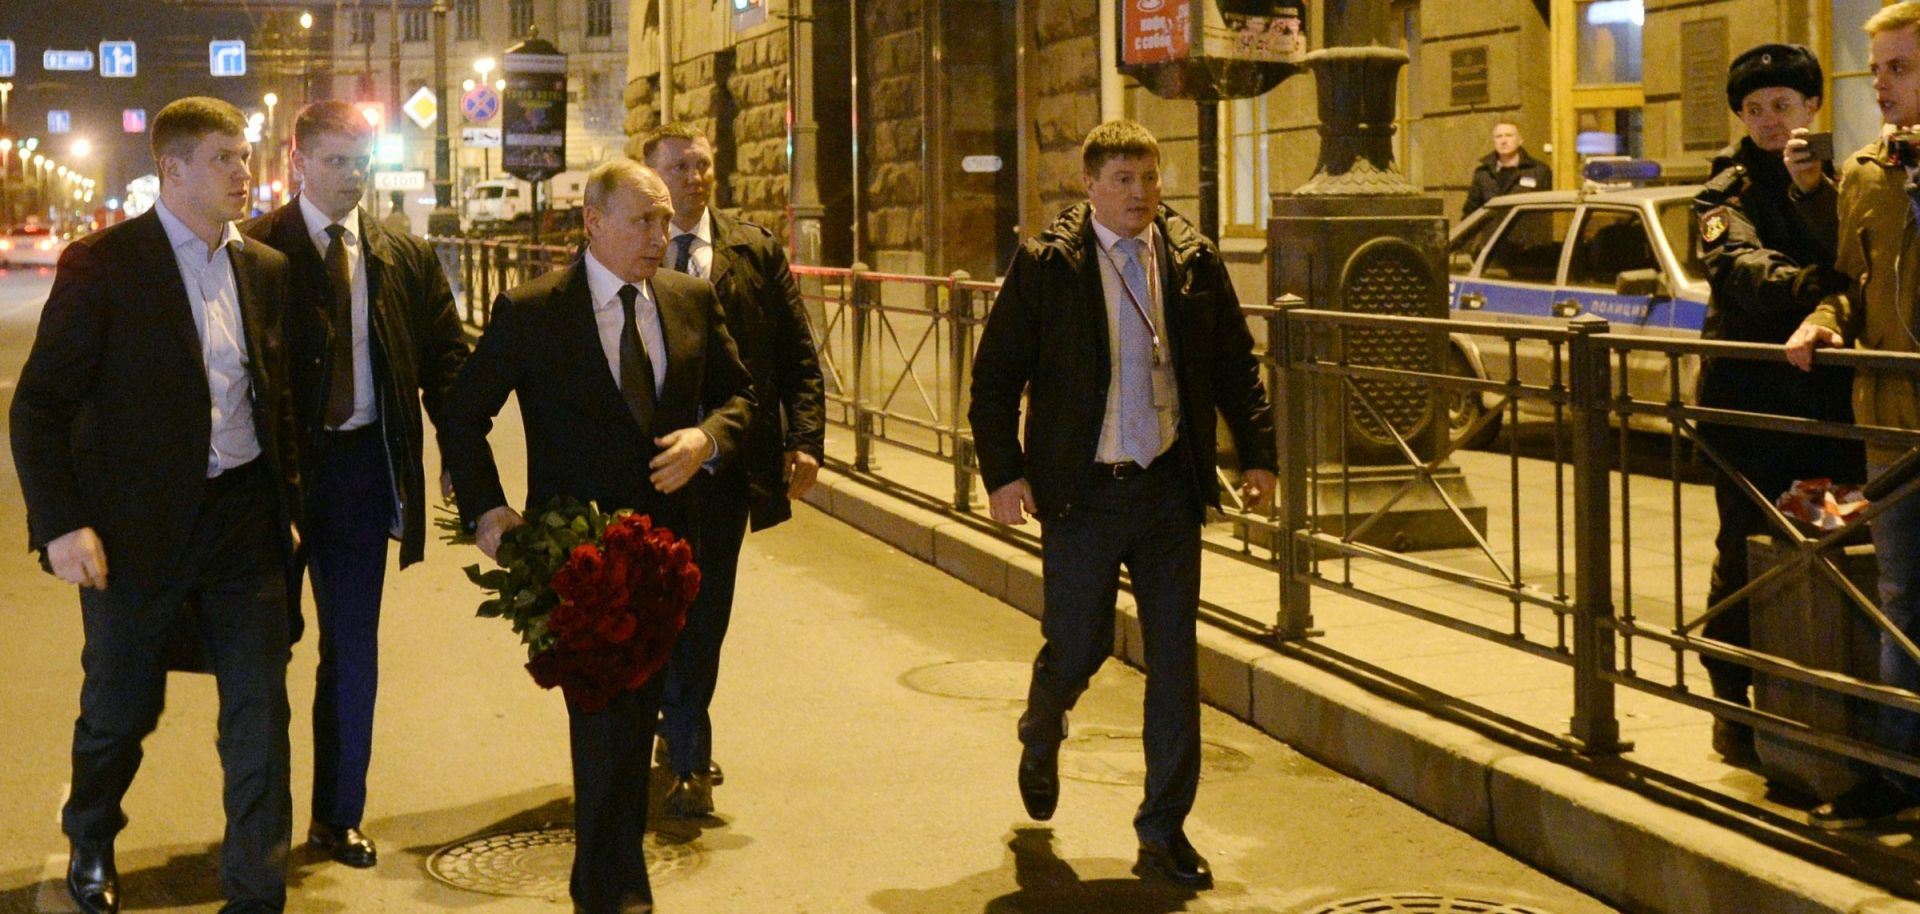 Russian President Vladimir Putin brings flowers to honor the victims of Monday's explosion at St. Petersburg's Technological Institute metro station. Though Putin was in the city at the time of the bombing, he was not its target.